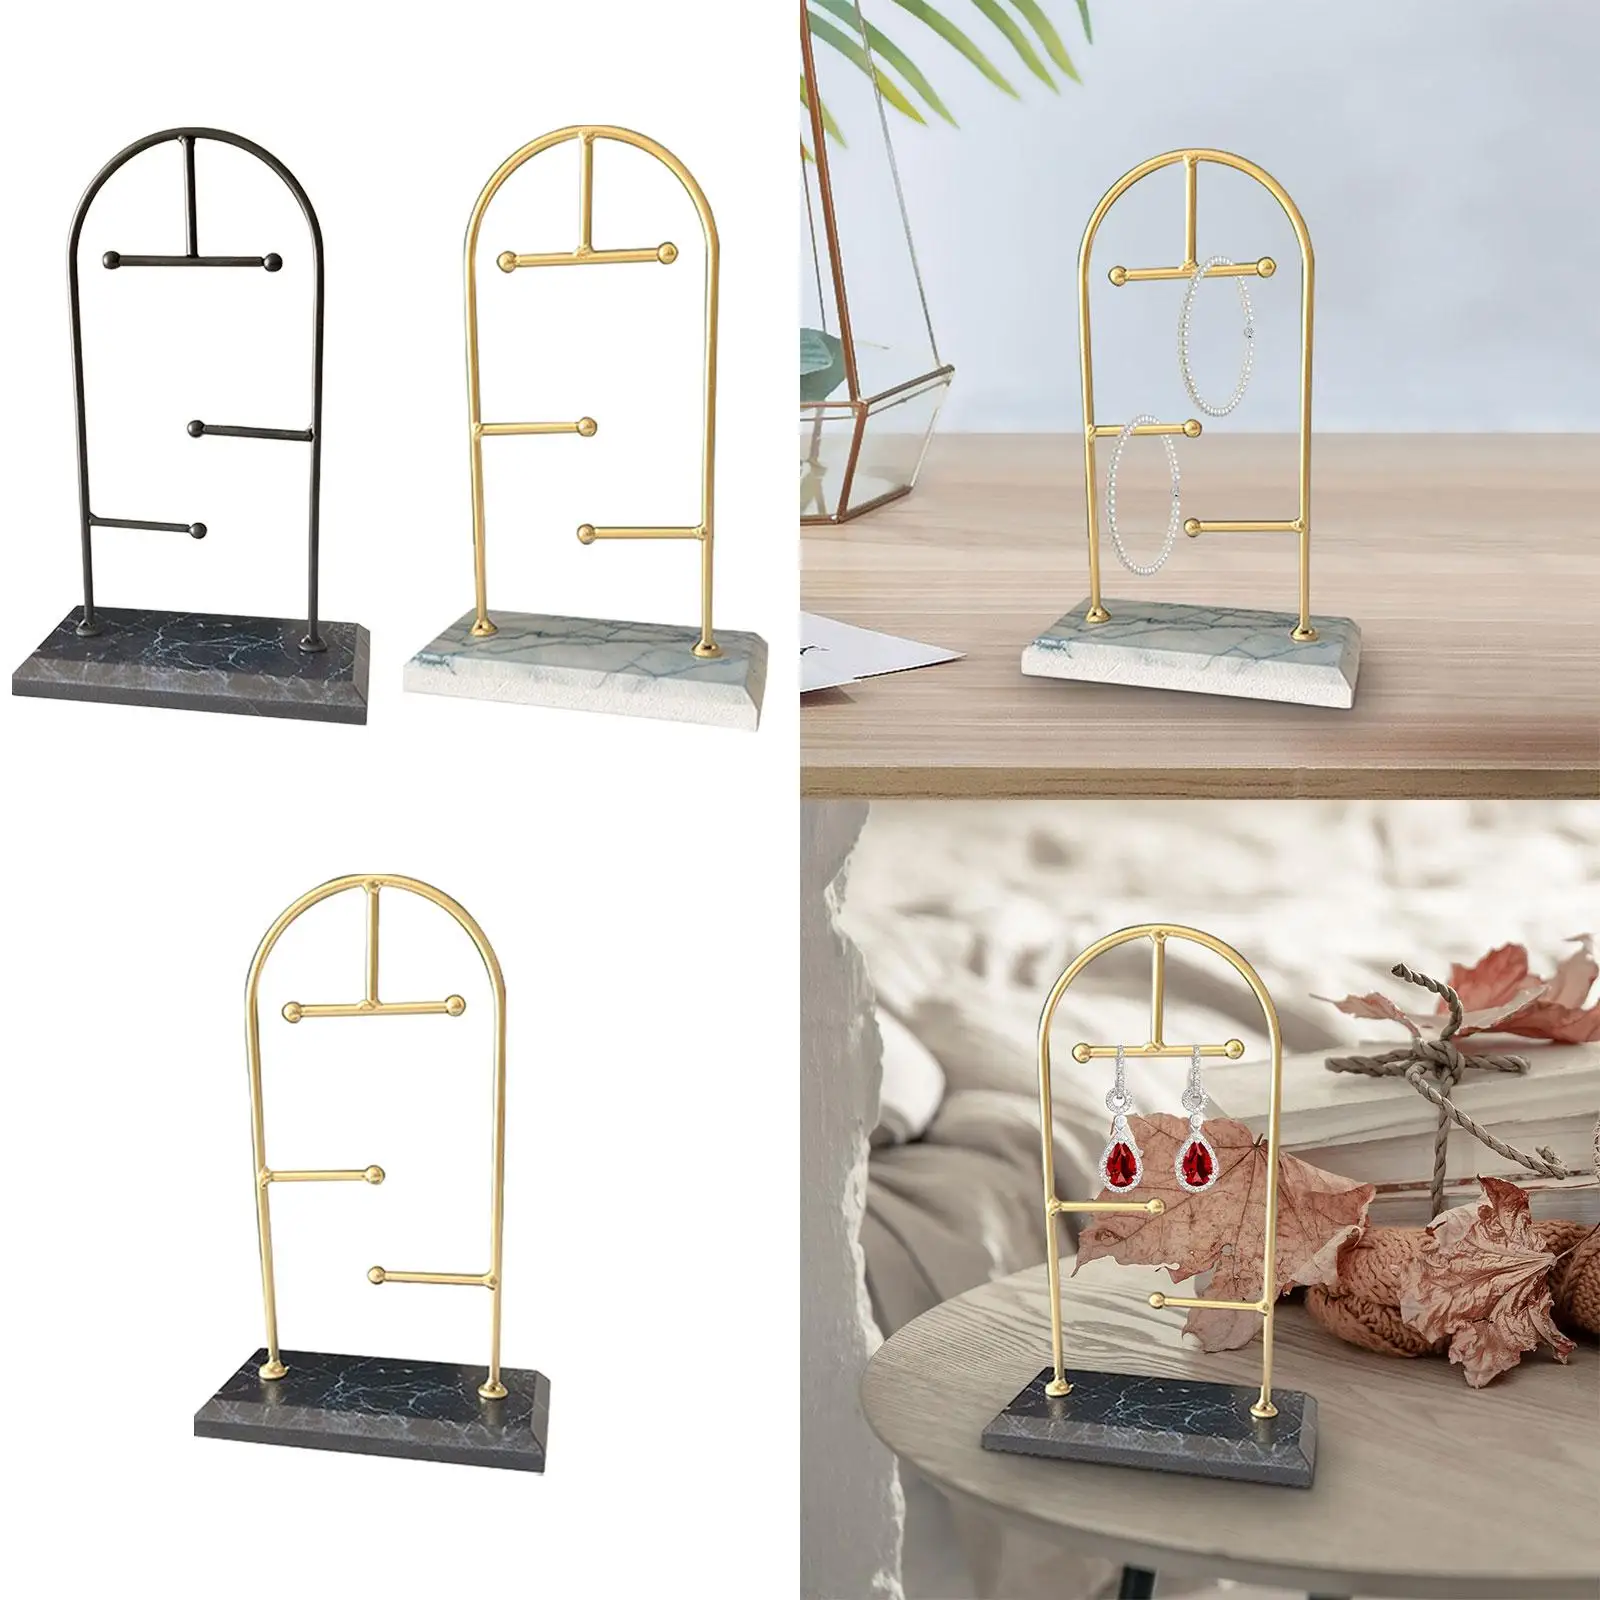 Earrings Storage Rack Jewelry Organizer Ladies Rings Durable Jewelry Display Stand Necklace Holder for Tabletop Showcase Dorm